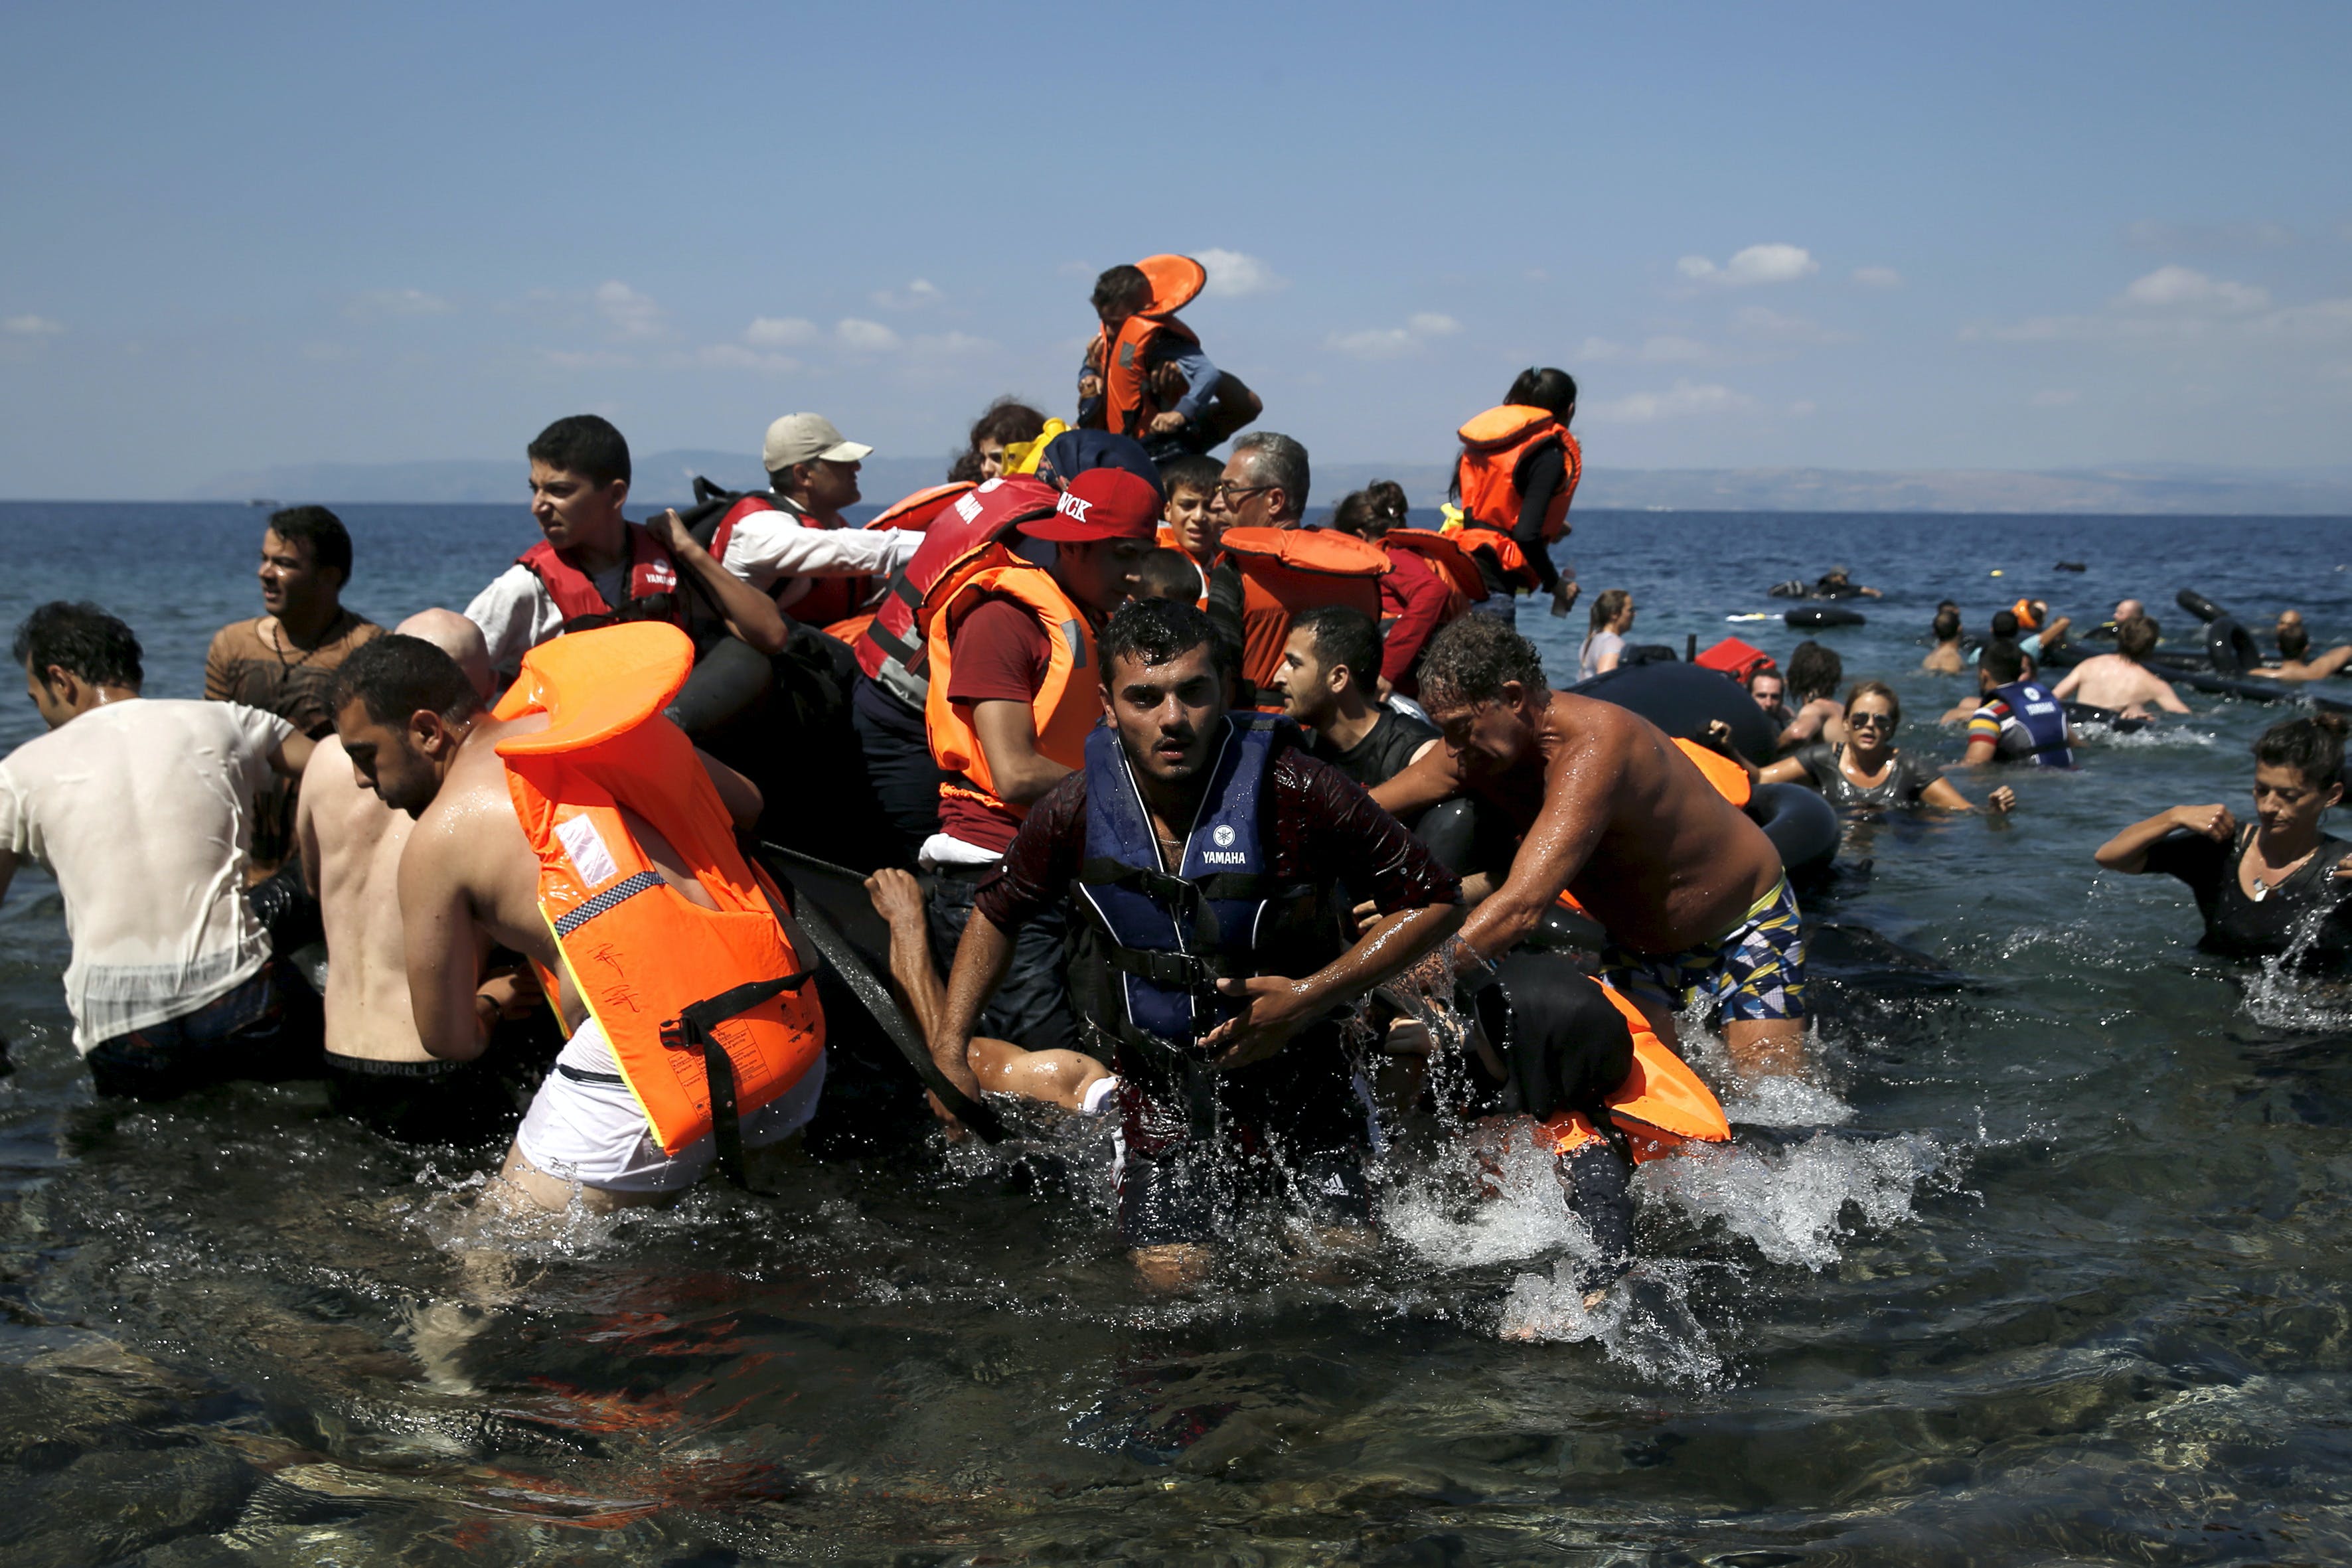 Syrian and Afghan refugees are helped by locals and volunteers as they reach the shore after their dinghy deflated some 100m away from the Greek island of Lesbos